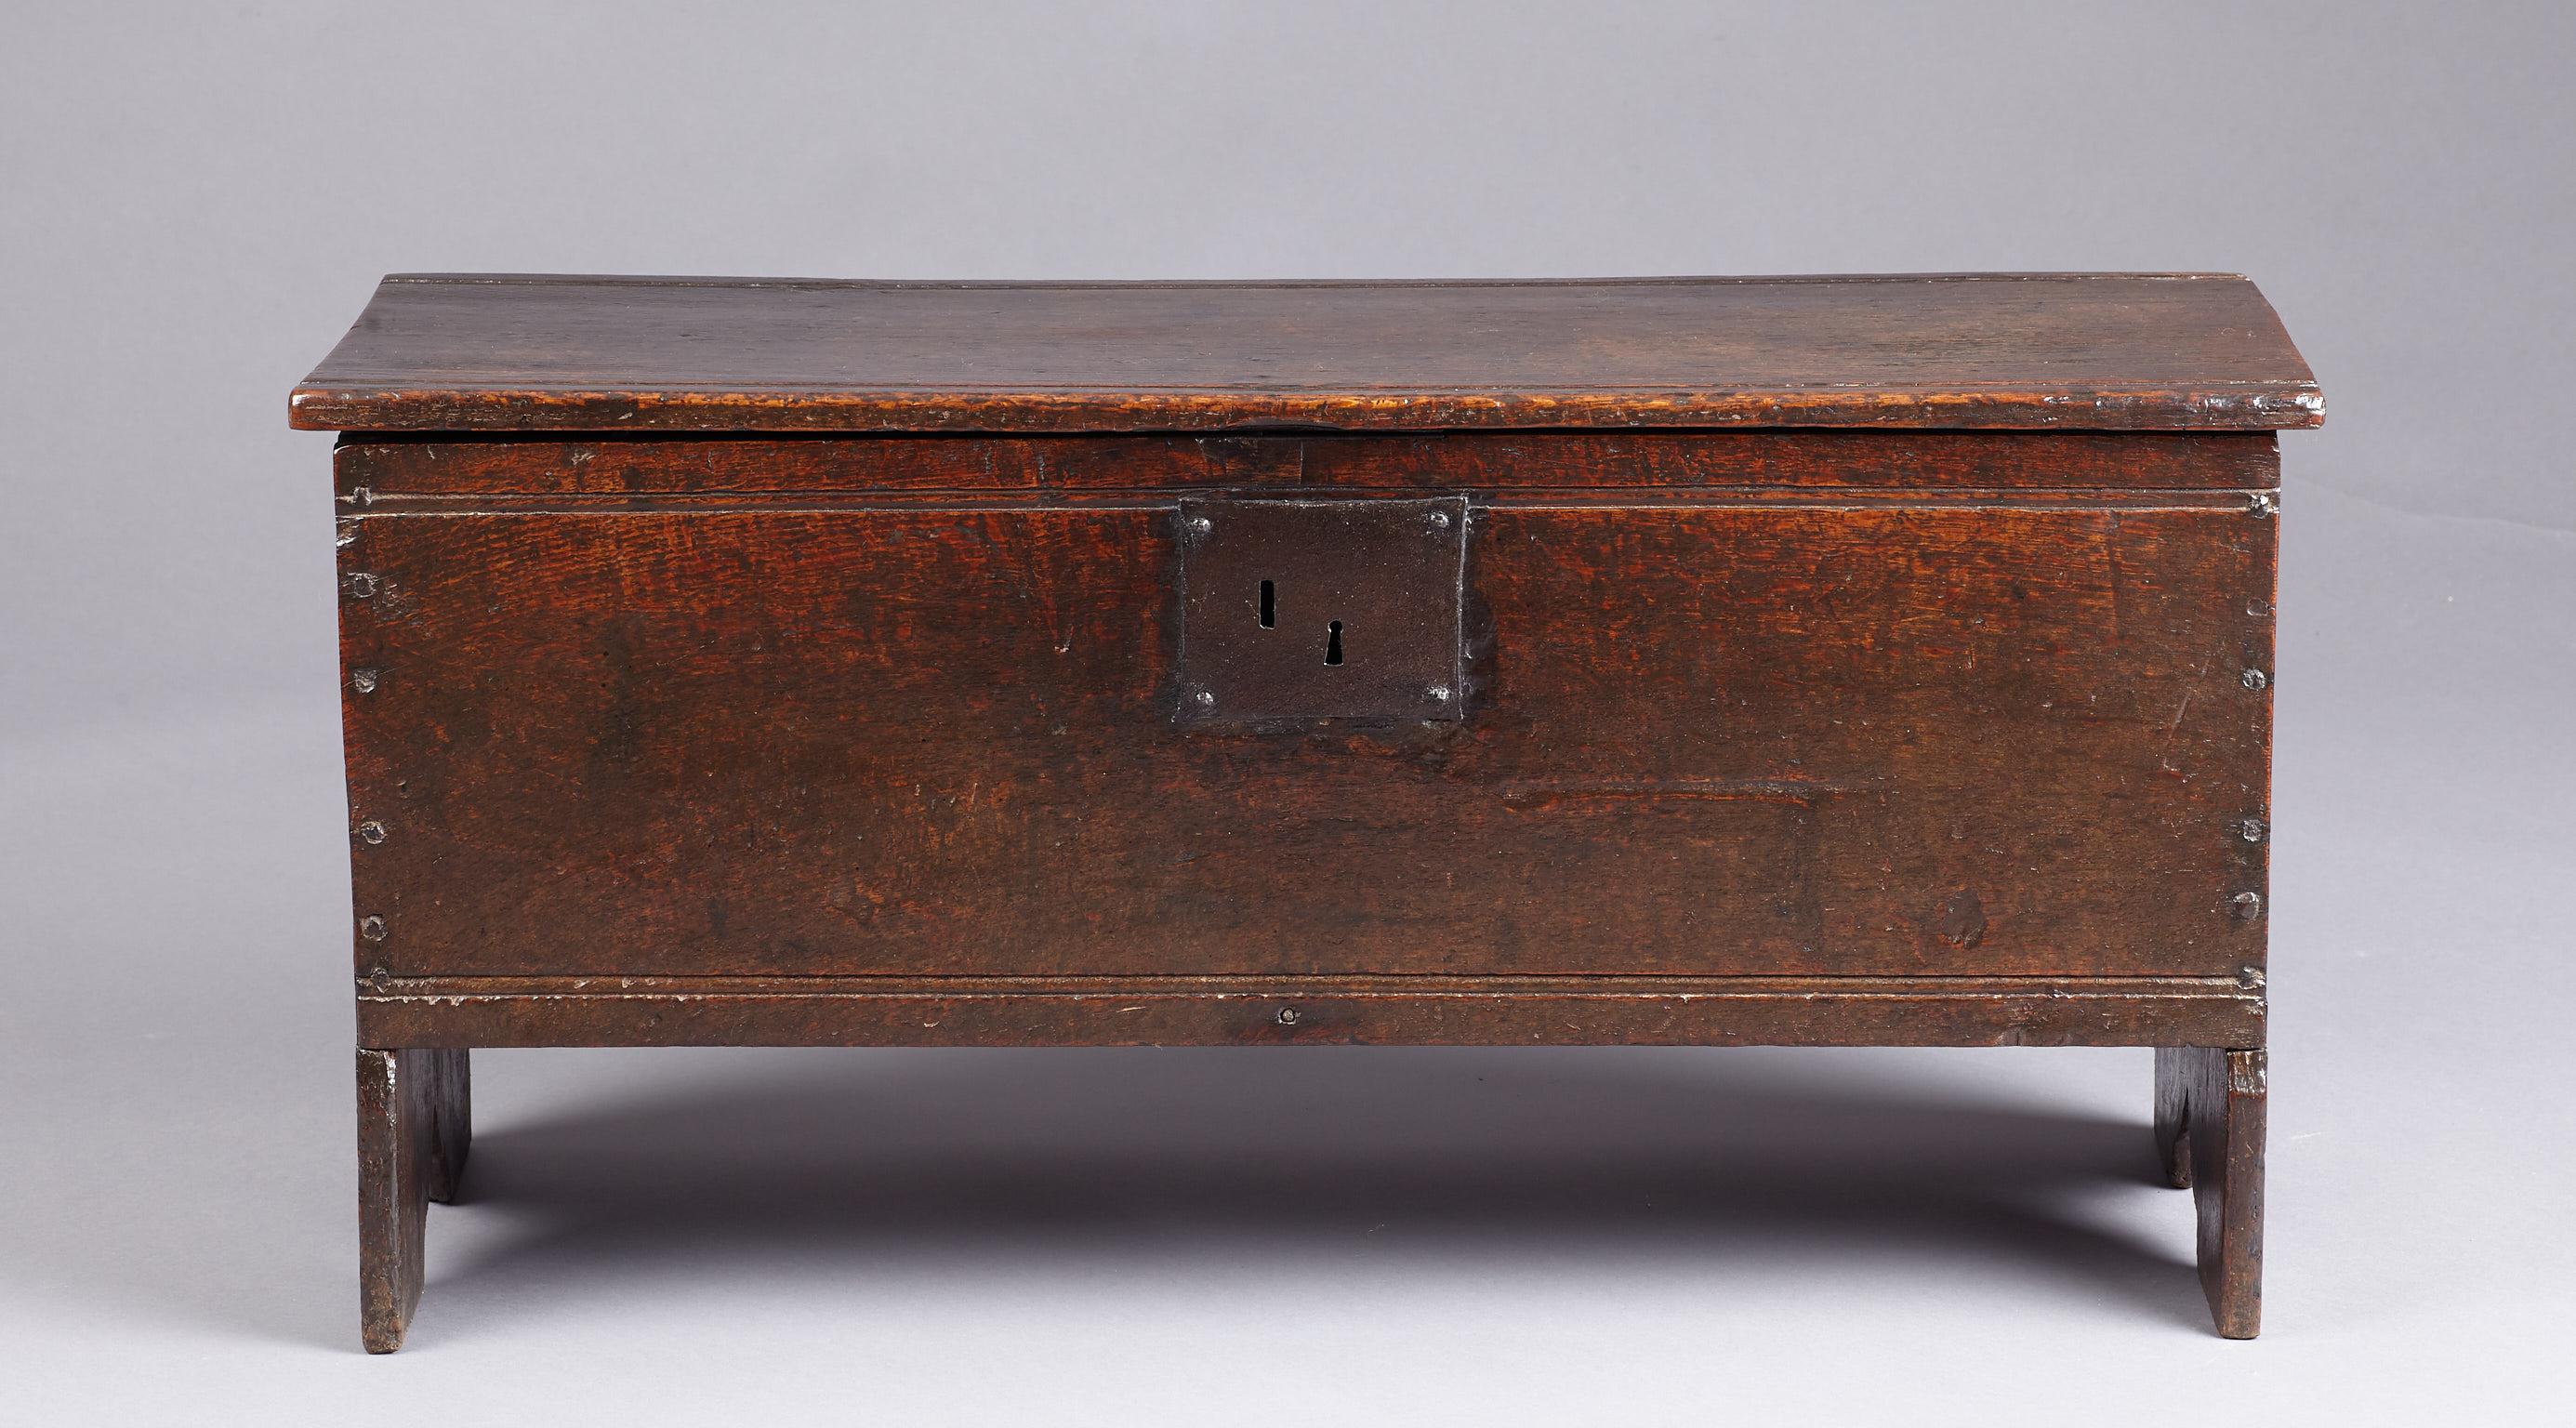 Very small Tudor / Elizabethan oak boarded or plank chest, circa 1540-1560.

The moulded plank lid above a board and buttress constructed chest with further moulded decoration to the front and rear planks. The buttress shaped end boards with rare